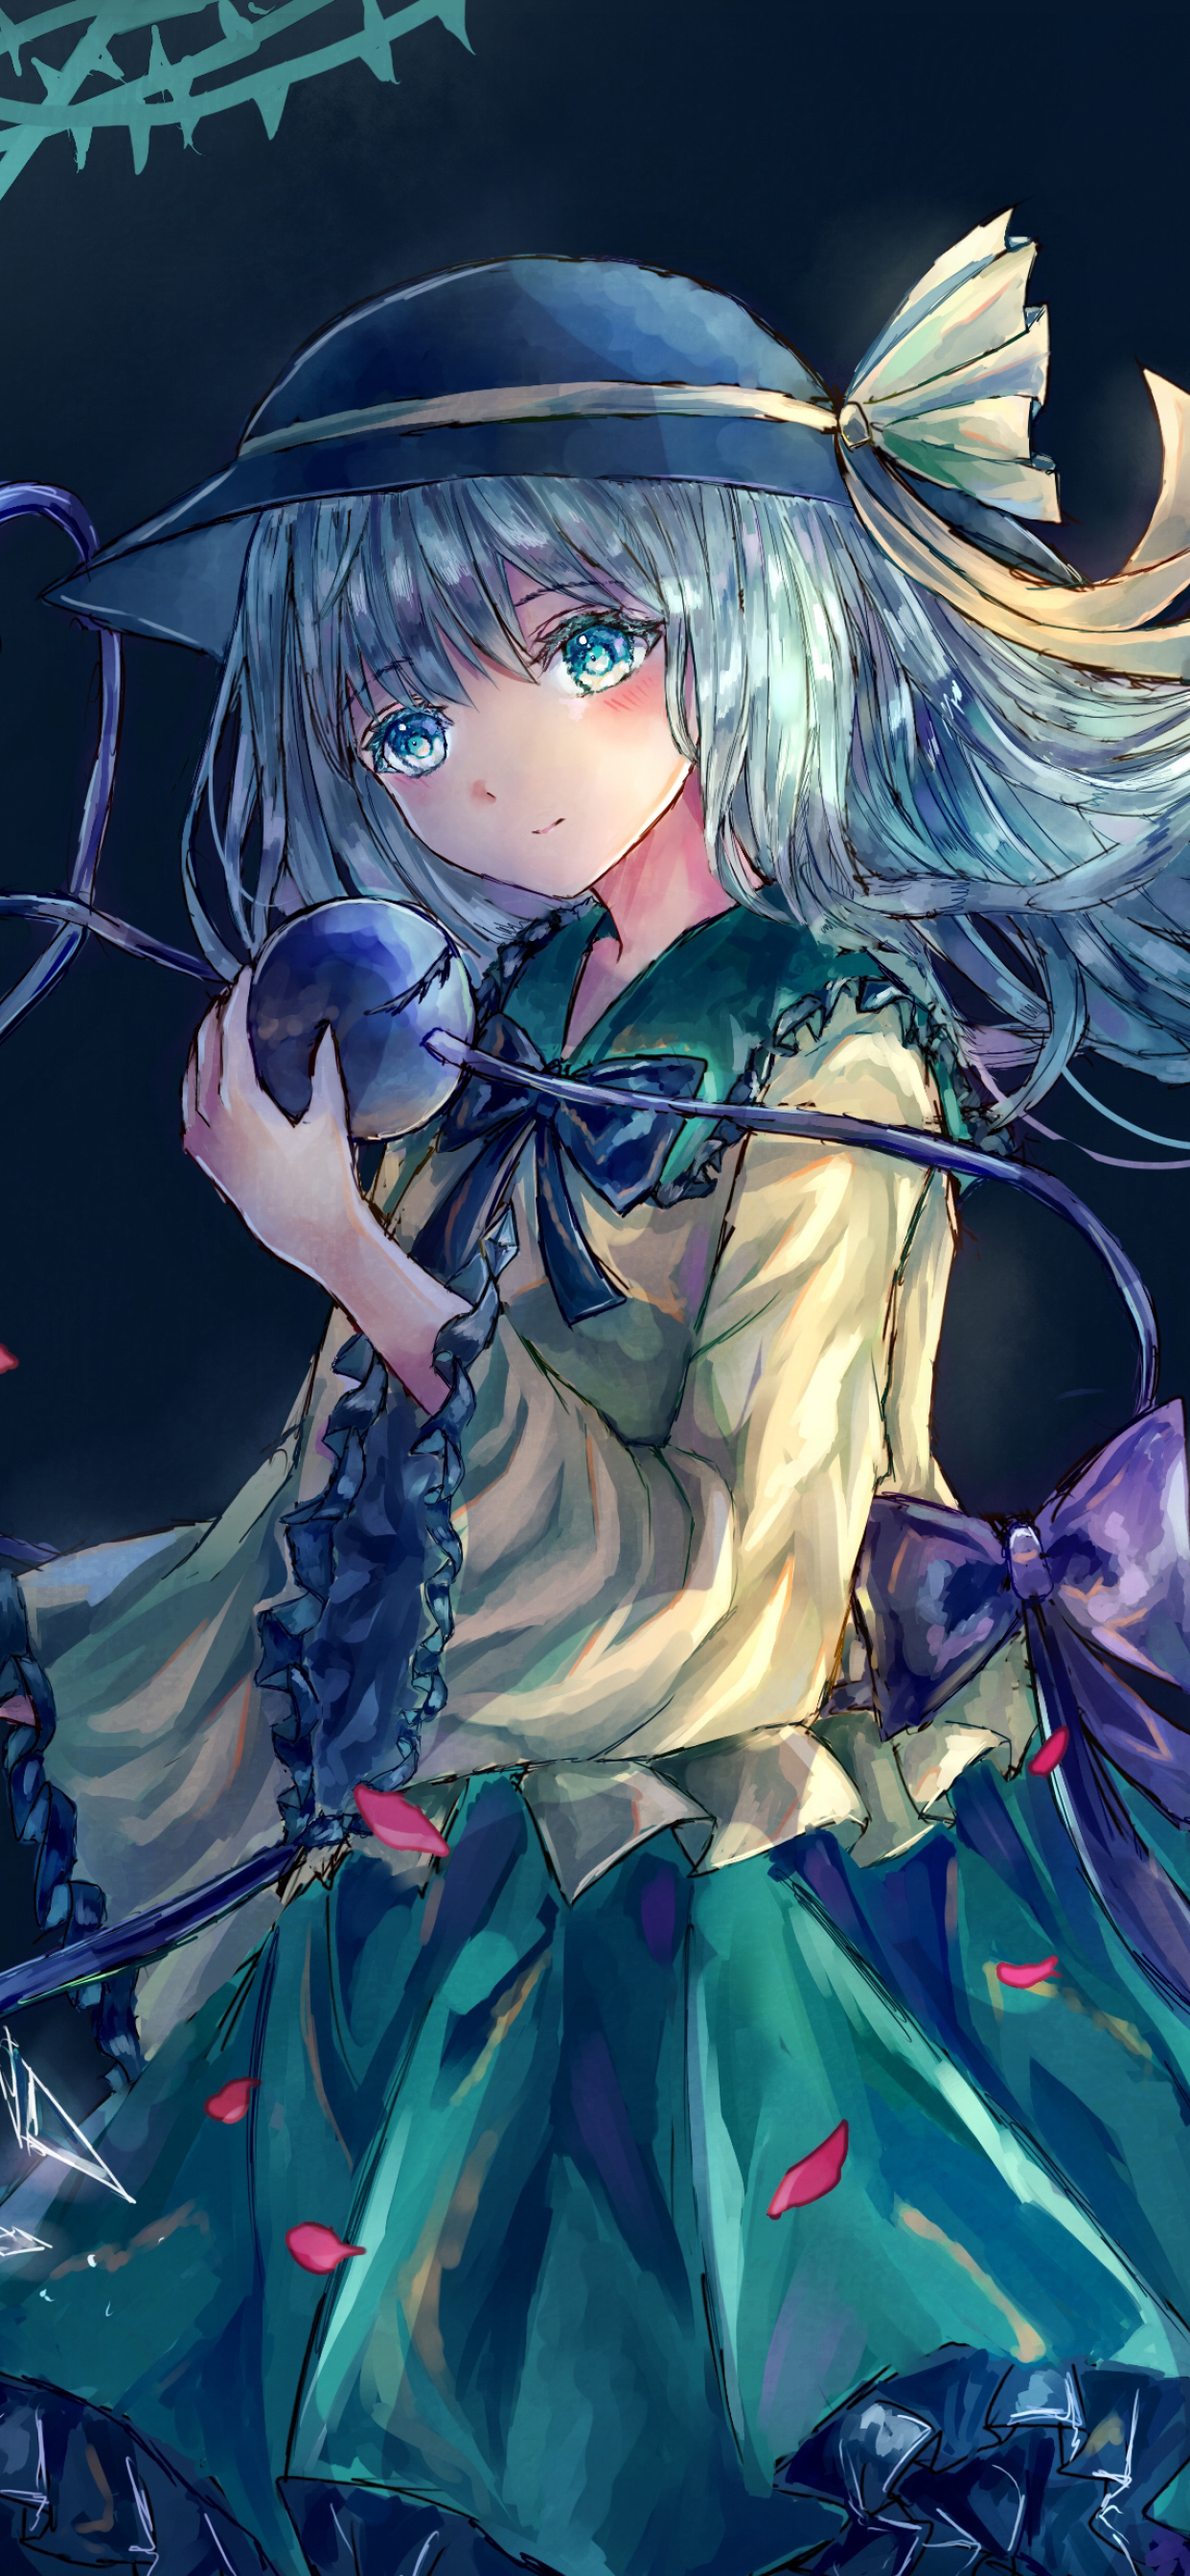 1242x26 Koishi Komeiji Touhou Iphone Xs Max Wallpaper Hd Anime 4k Wallpapers Images Photos And Background Wallpapers Den